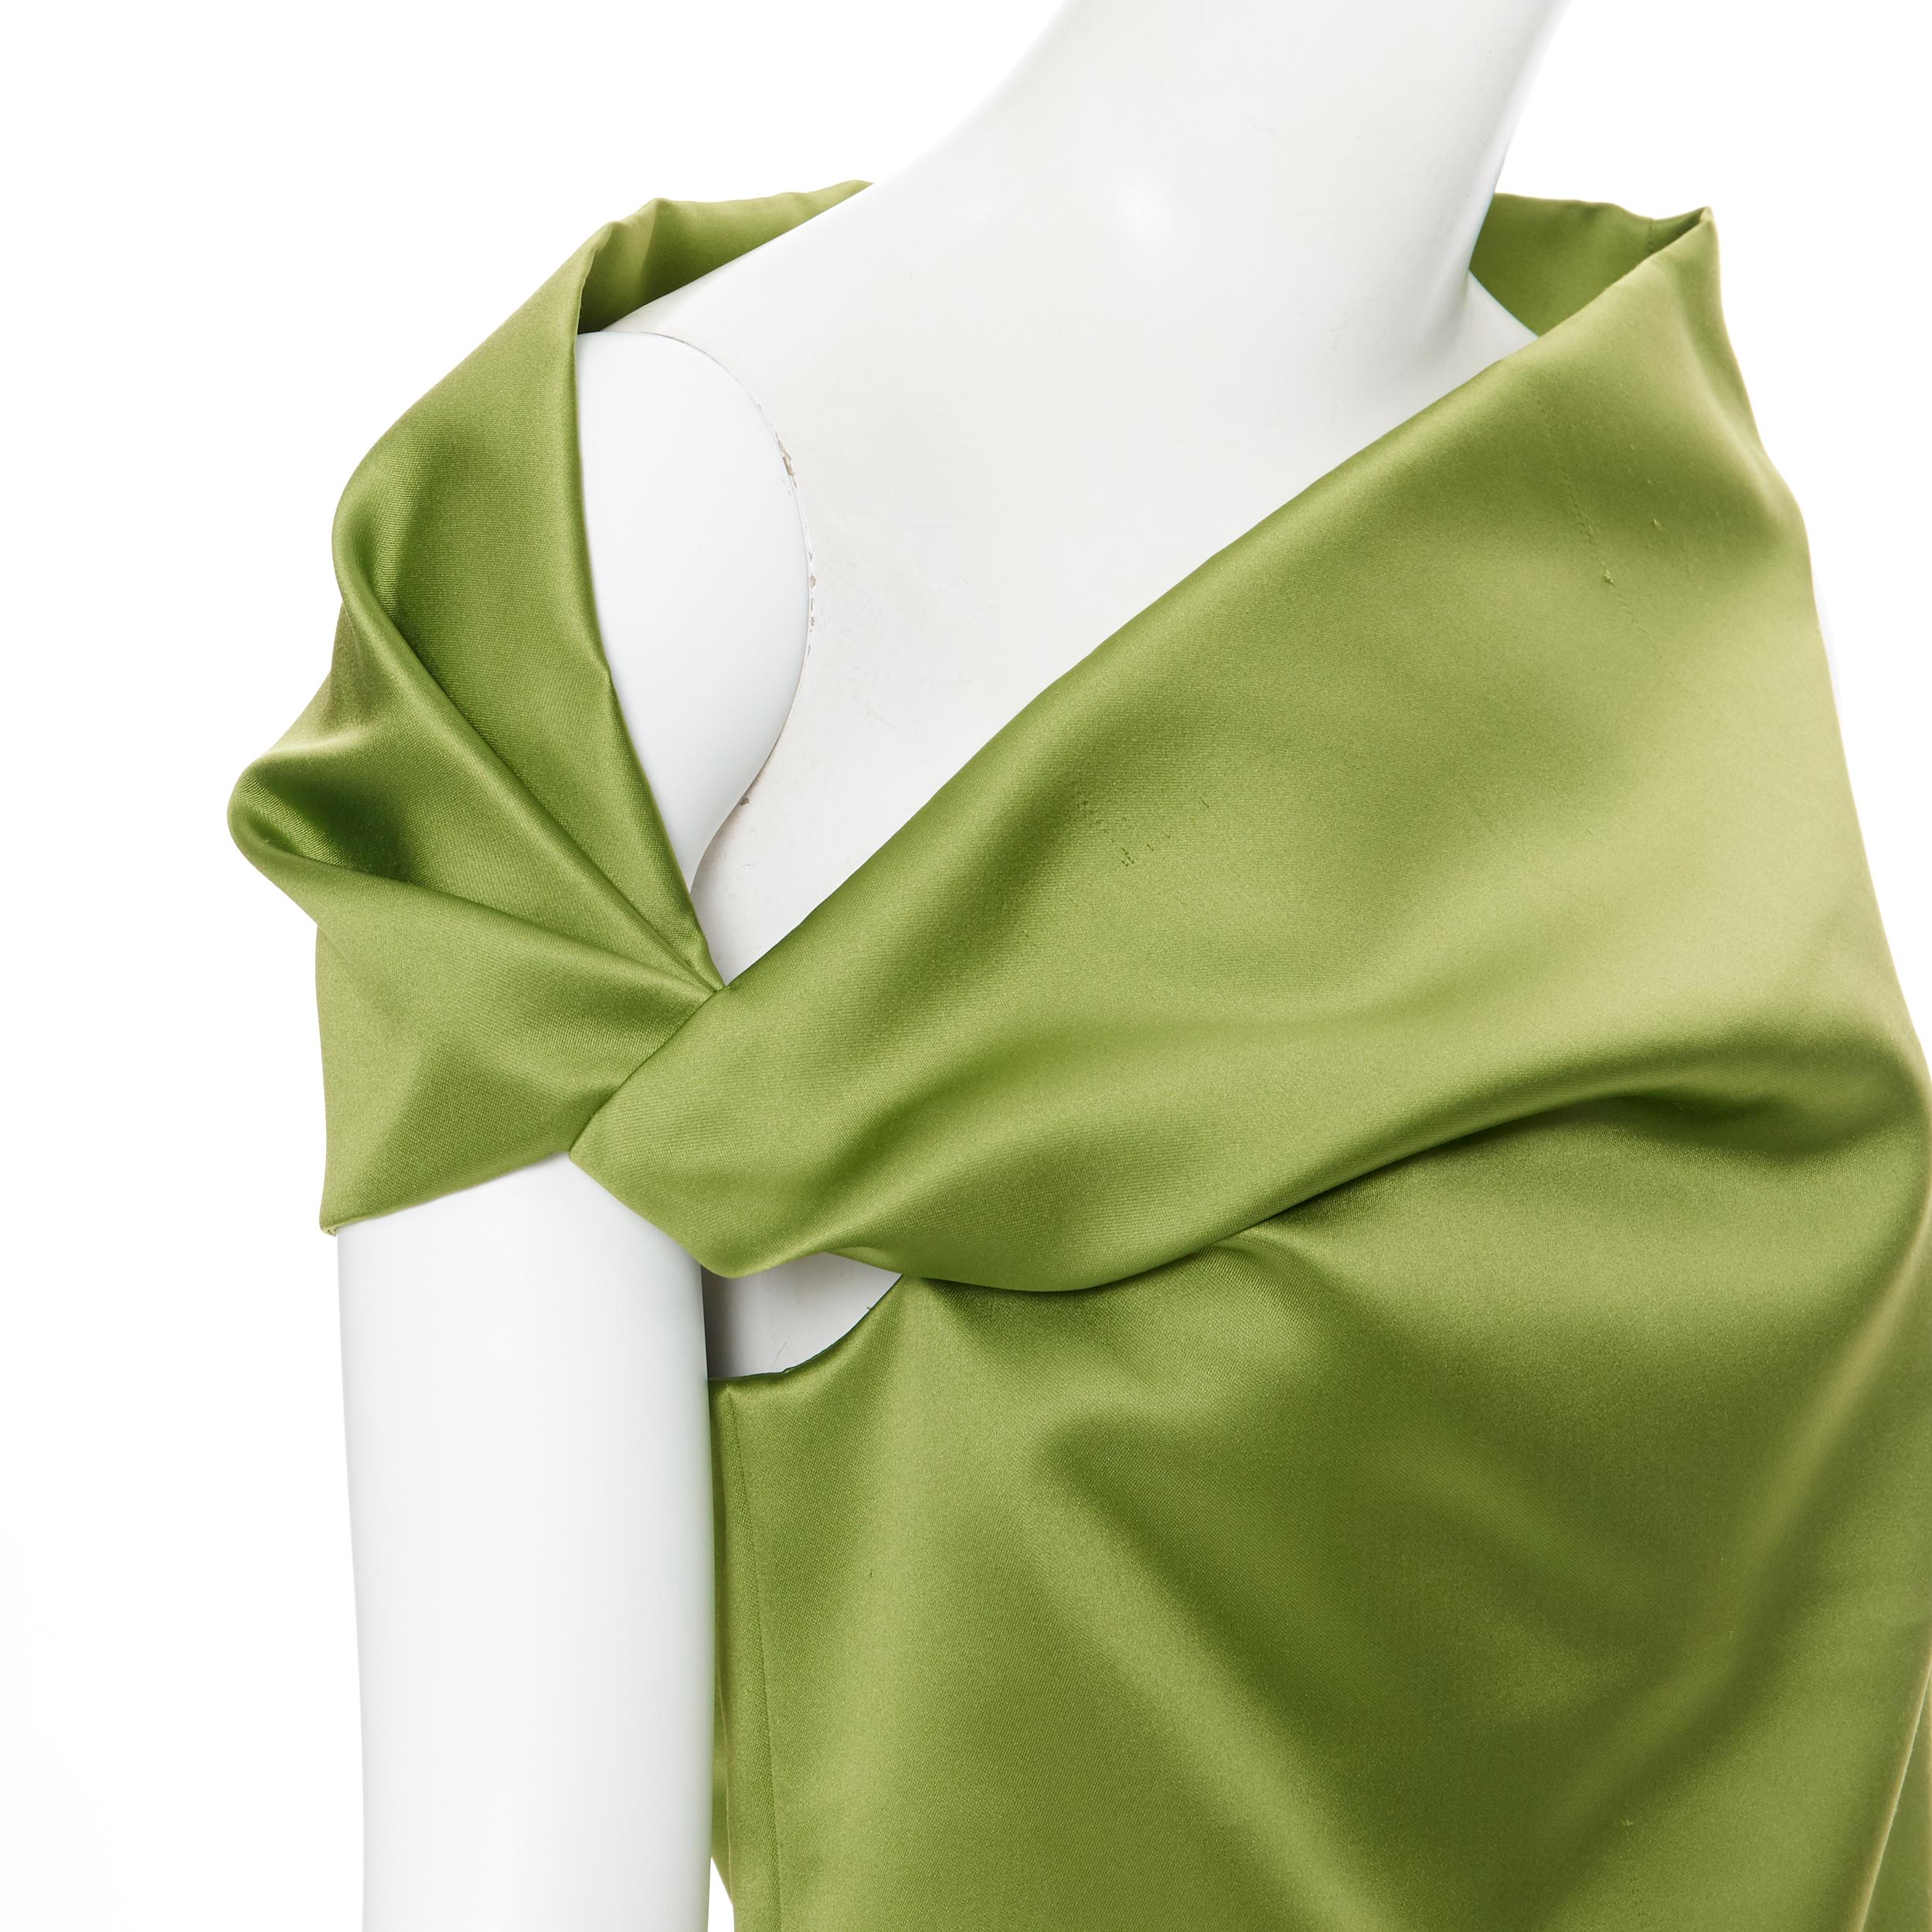 BALENCIAGA 2016 rich emerald green gathered asymmetric off shoulder top FR34 XS
Brand: Balenciaga
Collection: 2016
Model Name / Style: Off shoulder top
Material: Polyester
Color: Green
Pattern: Solid
Closure: Zip
Extra Detail: Zip closure on side.